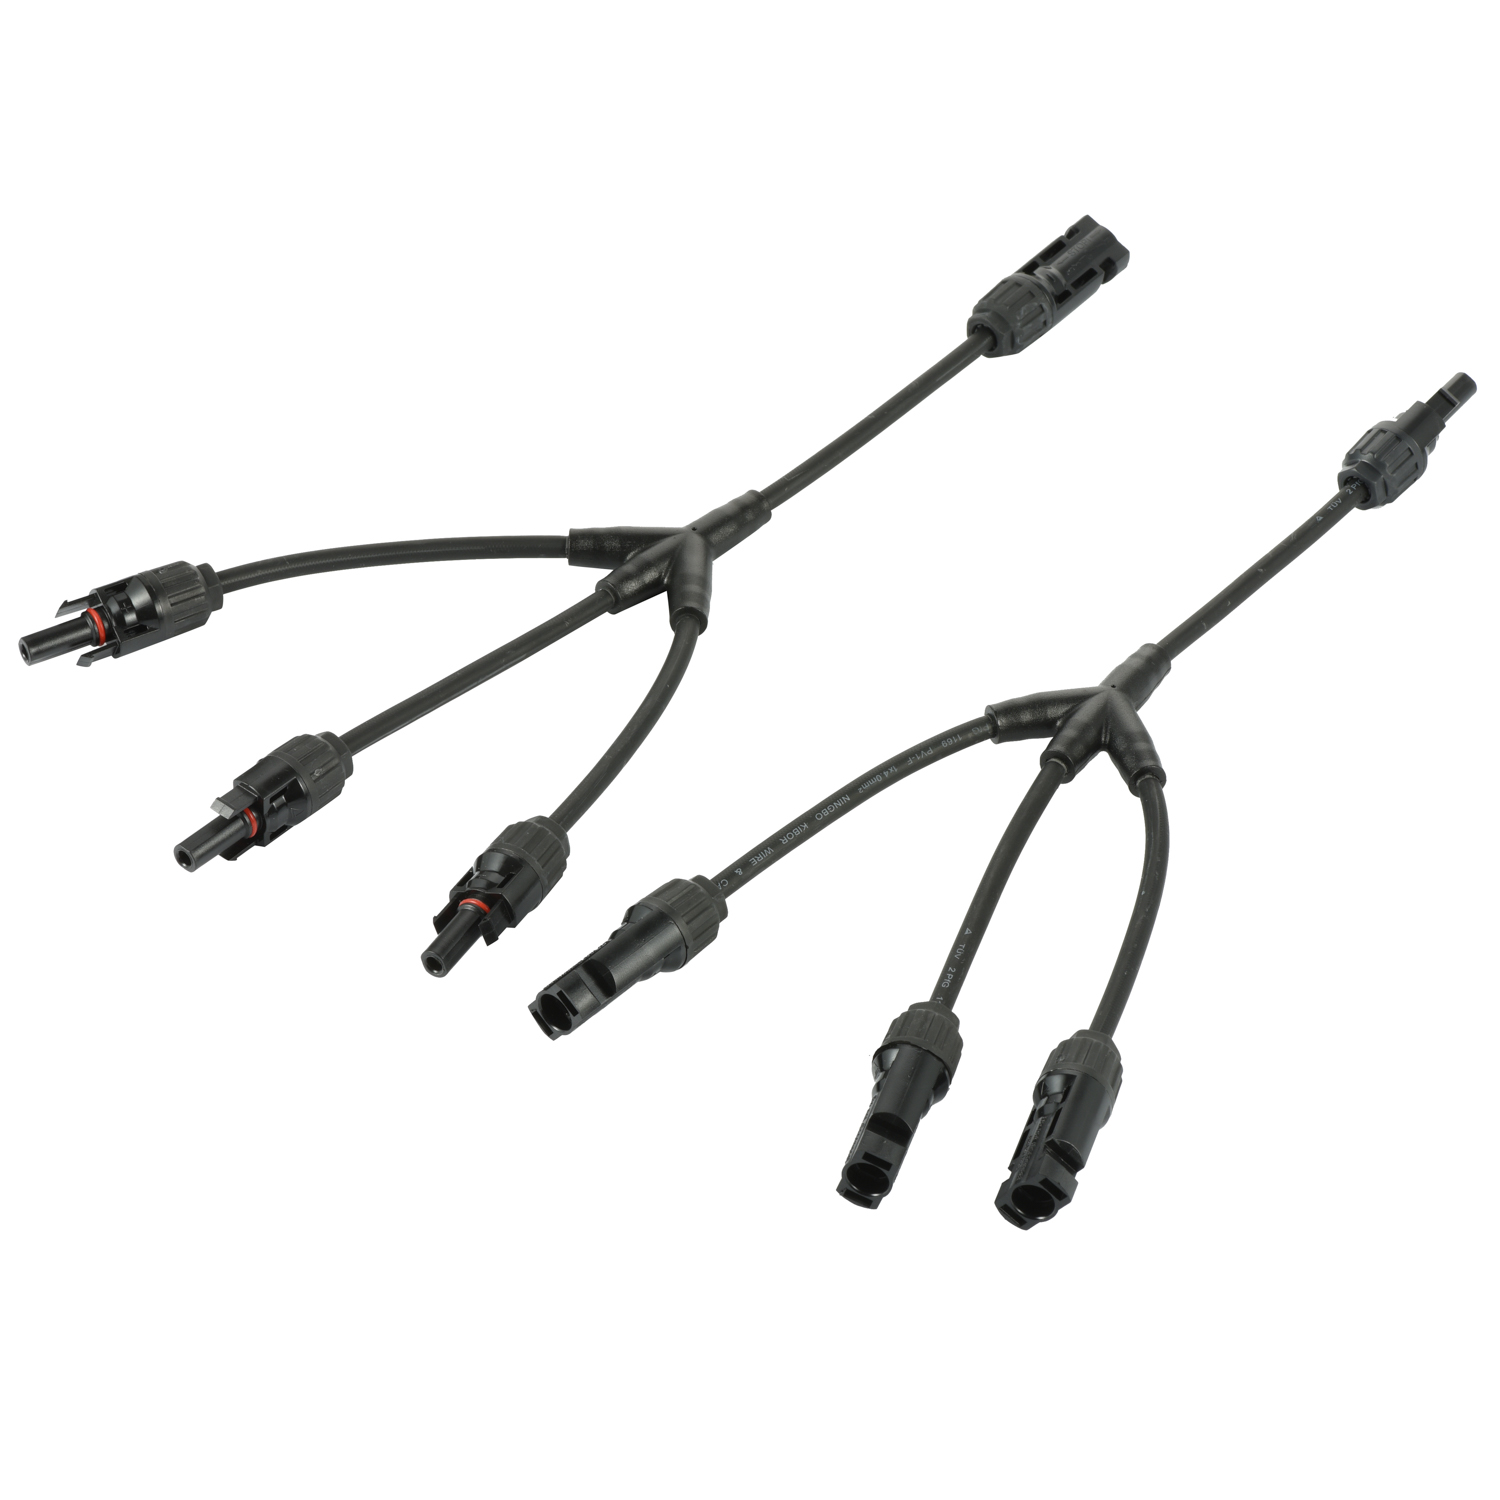 3-Way 3in1 MC4 Y Adapter Splitter Connector Solar PV Lead Cable extension Wire harness TUV UL Approved